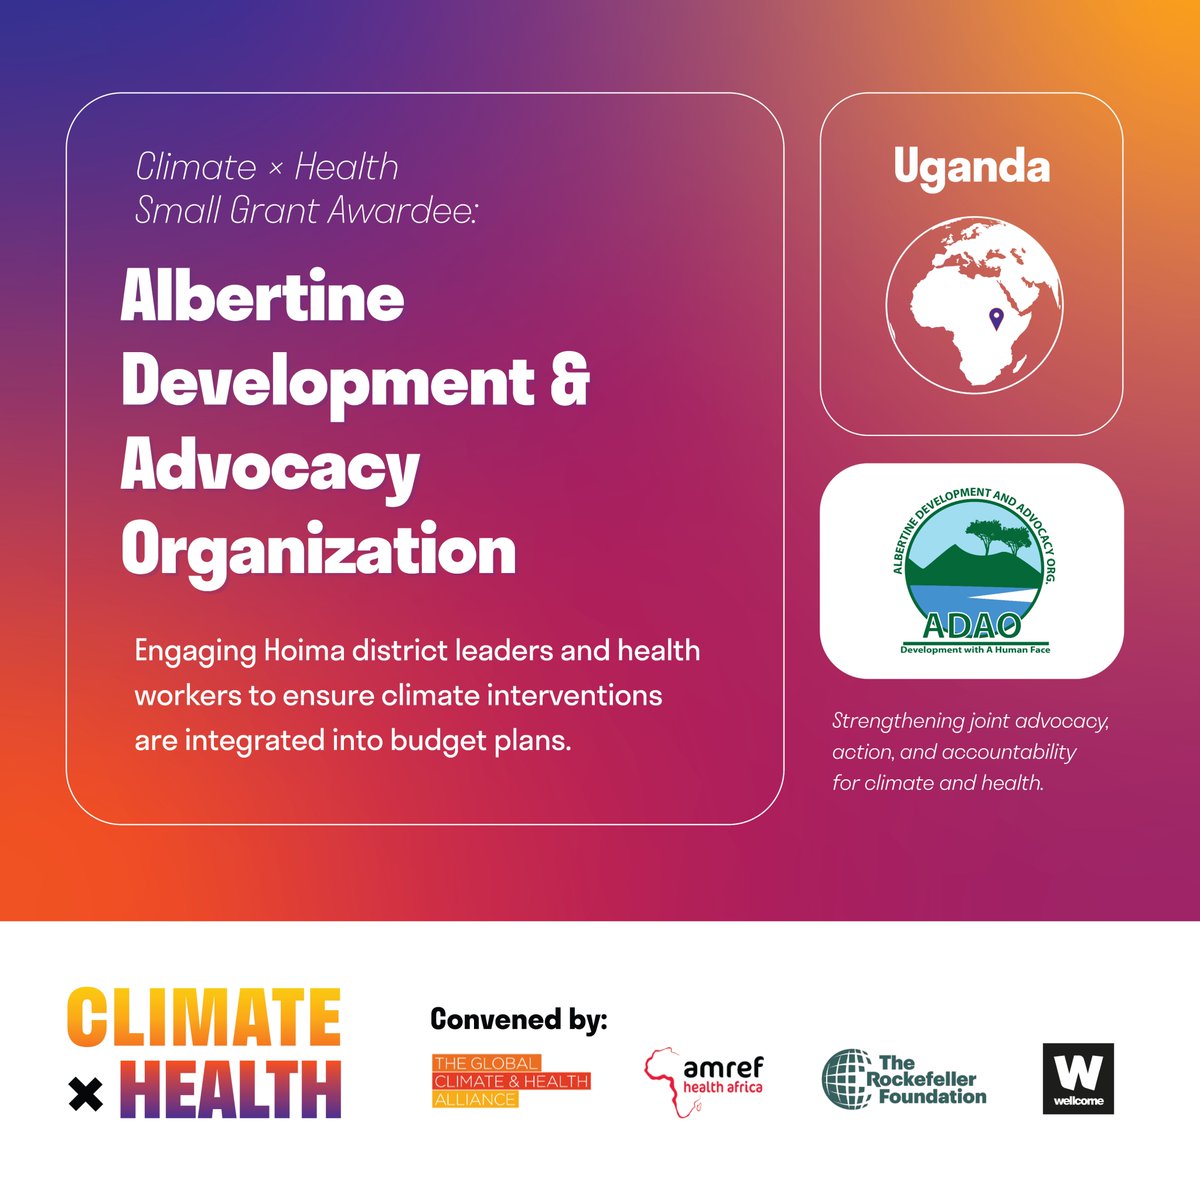 Congratulations to @AlbertineA9196, winner of a Climate x Health small grant to engage district leaders and health workers in Hoima, Uganda, to integrate climate and health interventions into budget plans. Learn more about their project here: climatexhealth.org/small-grants